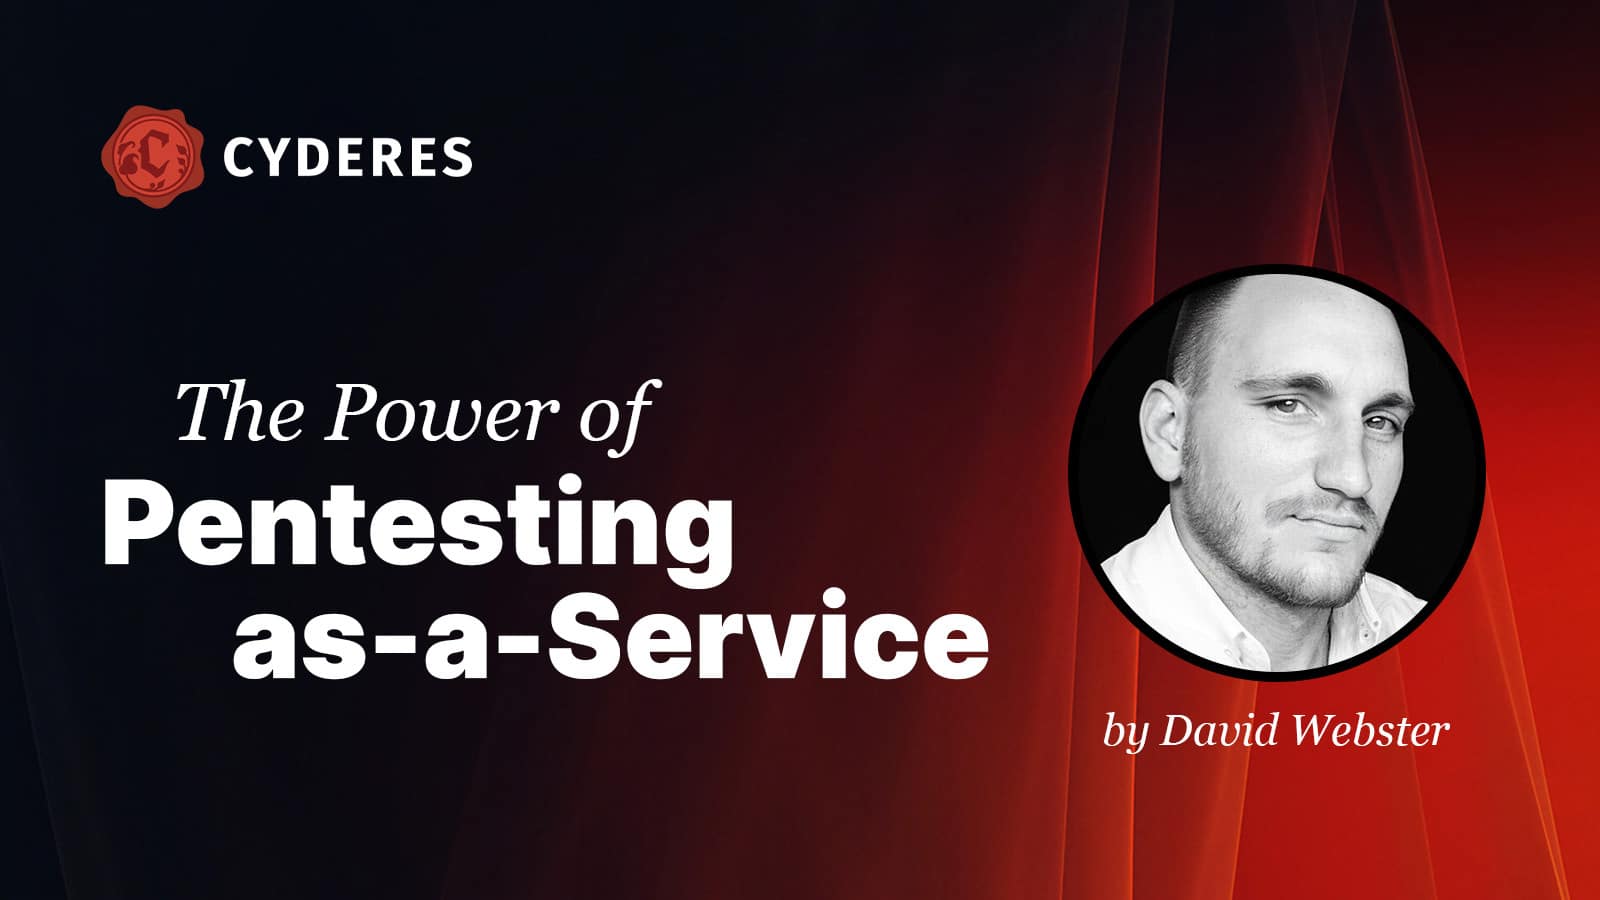 The Power of Pentesting as-a-Service